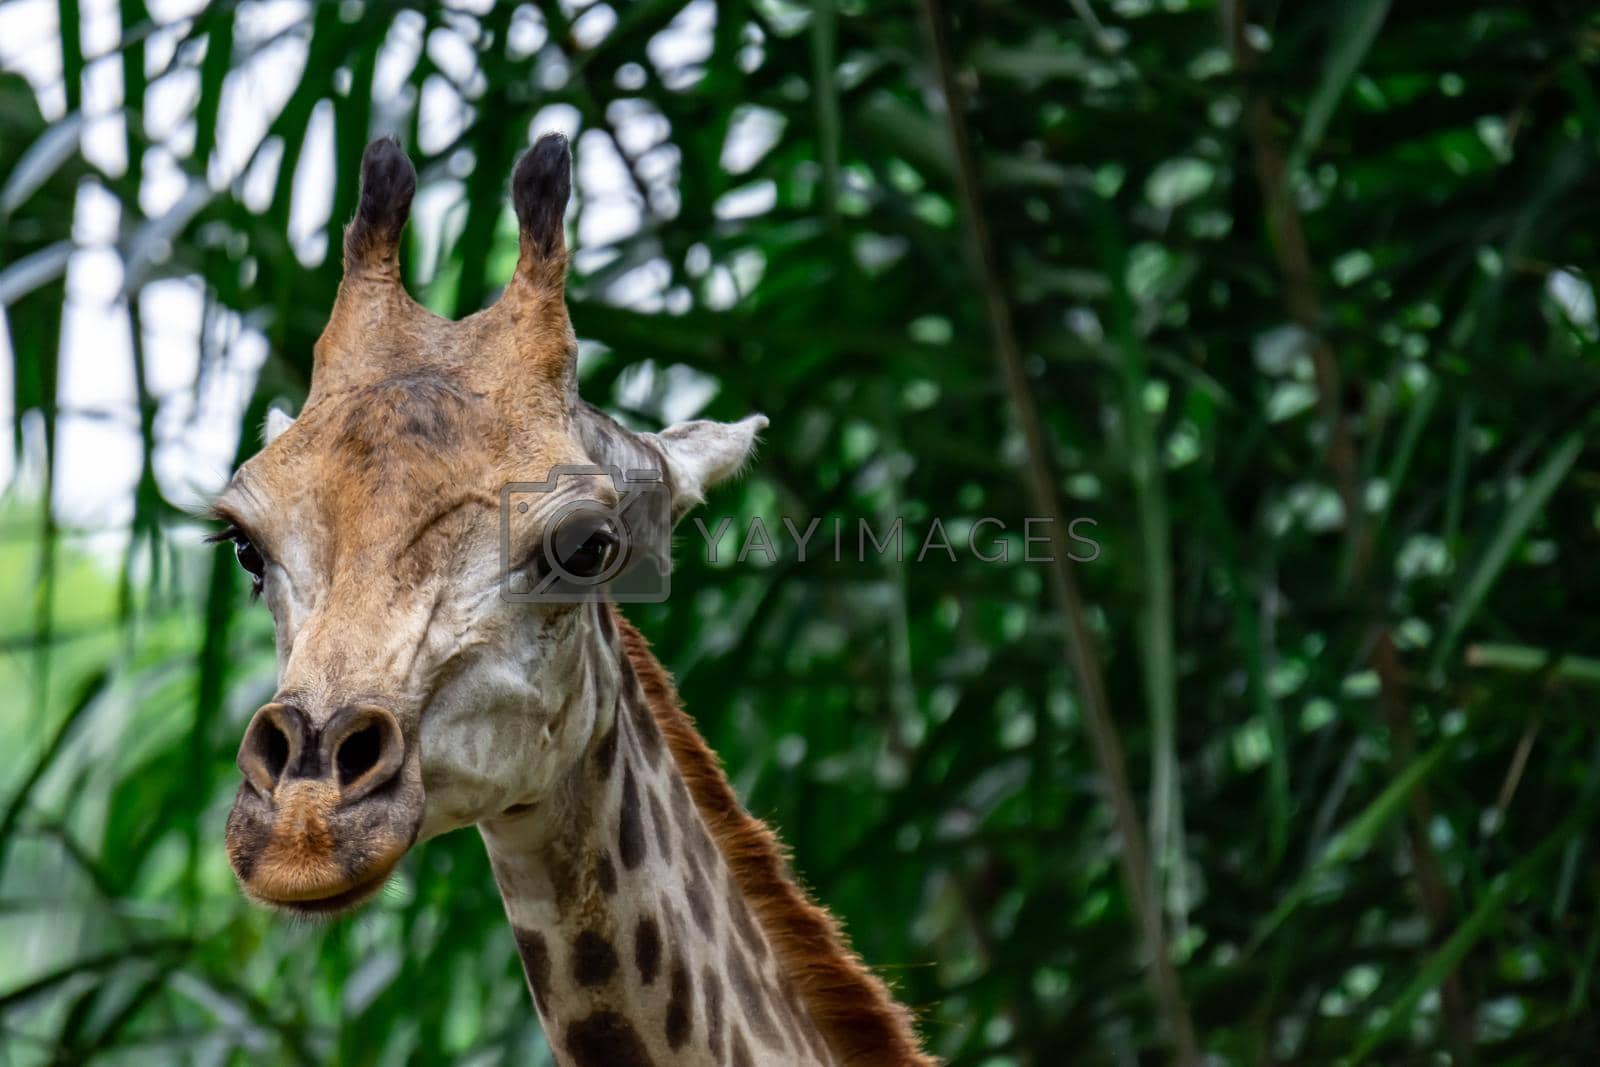 Royalty free image of A closeup photo of a Giraffa camelopardalis Giraffe's head in a zoo somewhere in Asia by billroque